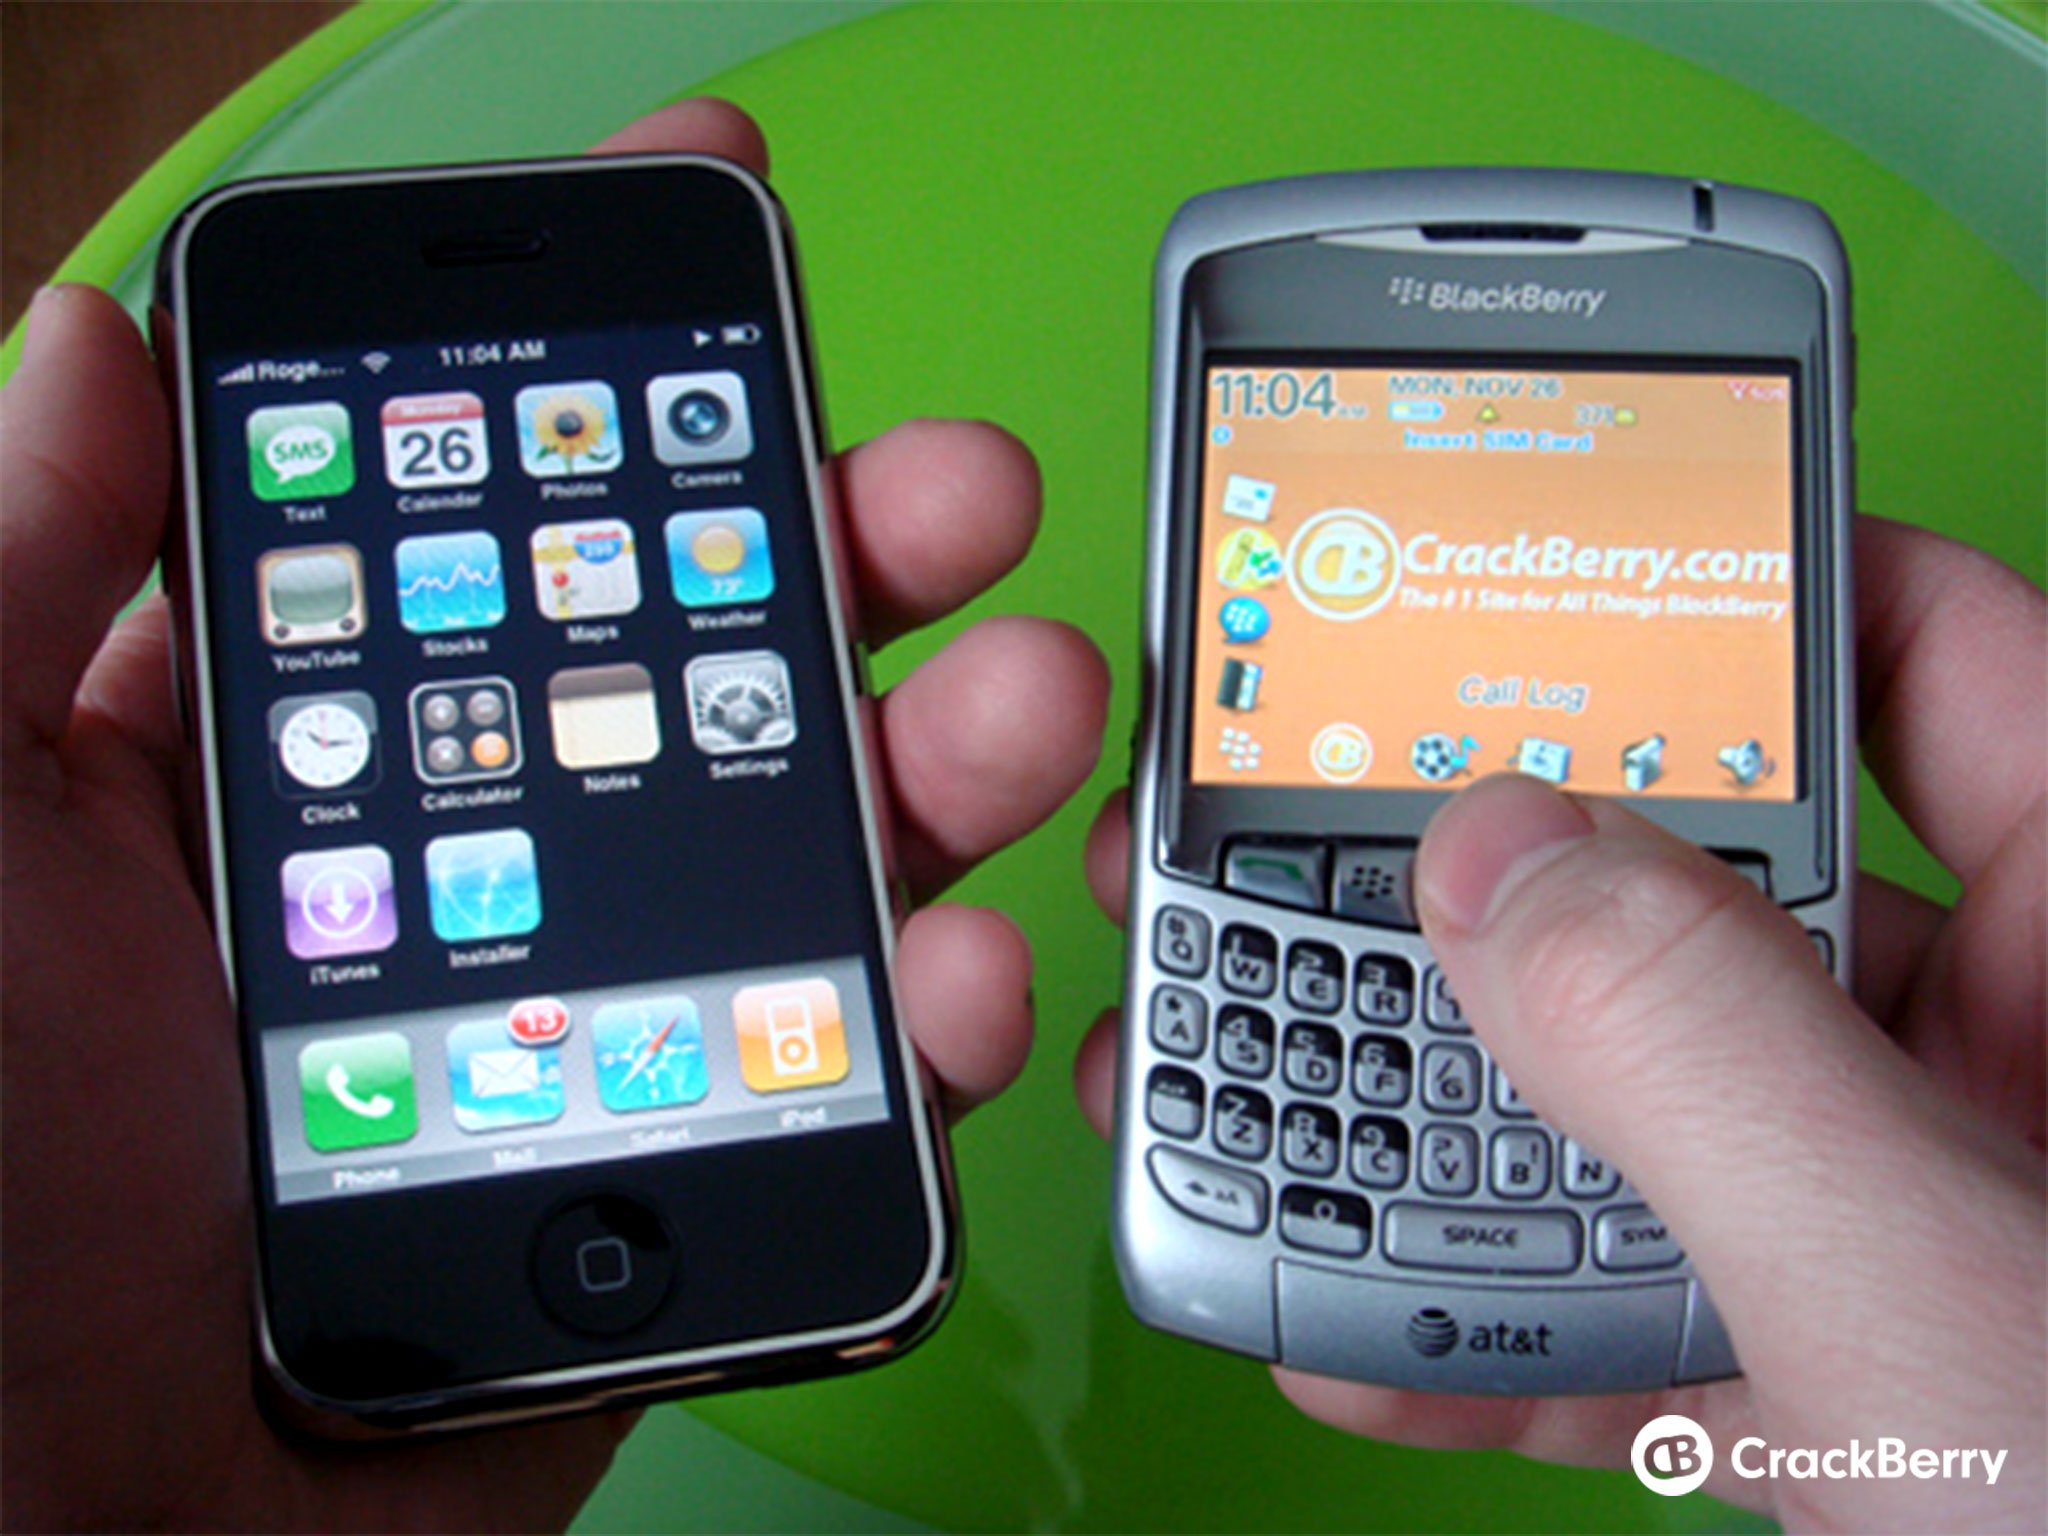 iPhone and BlackBerry